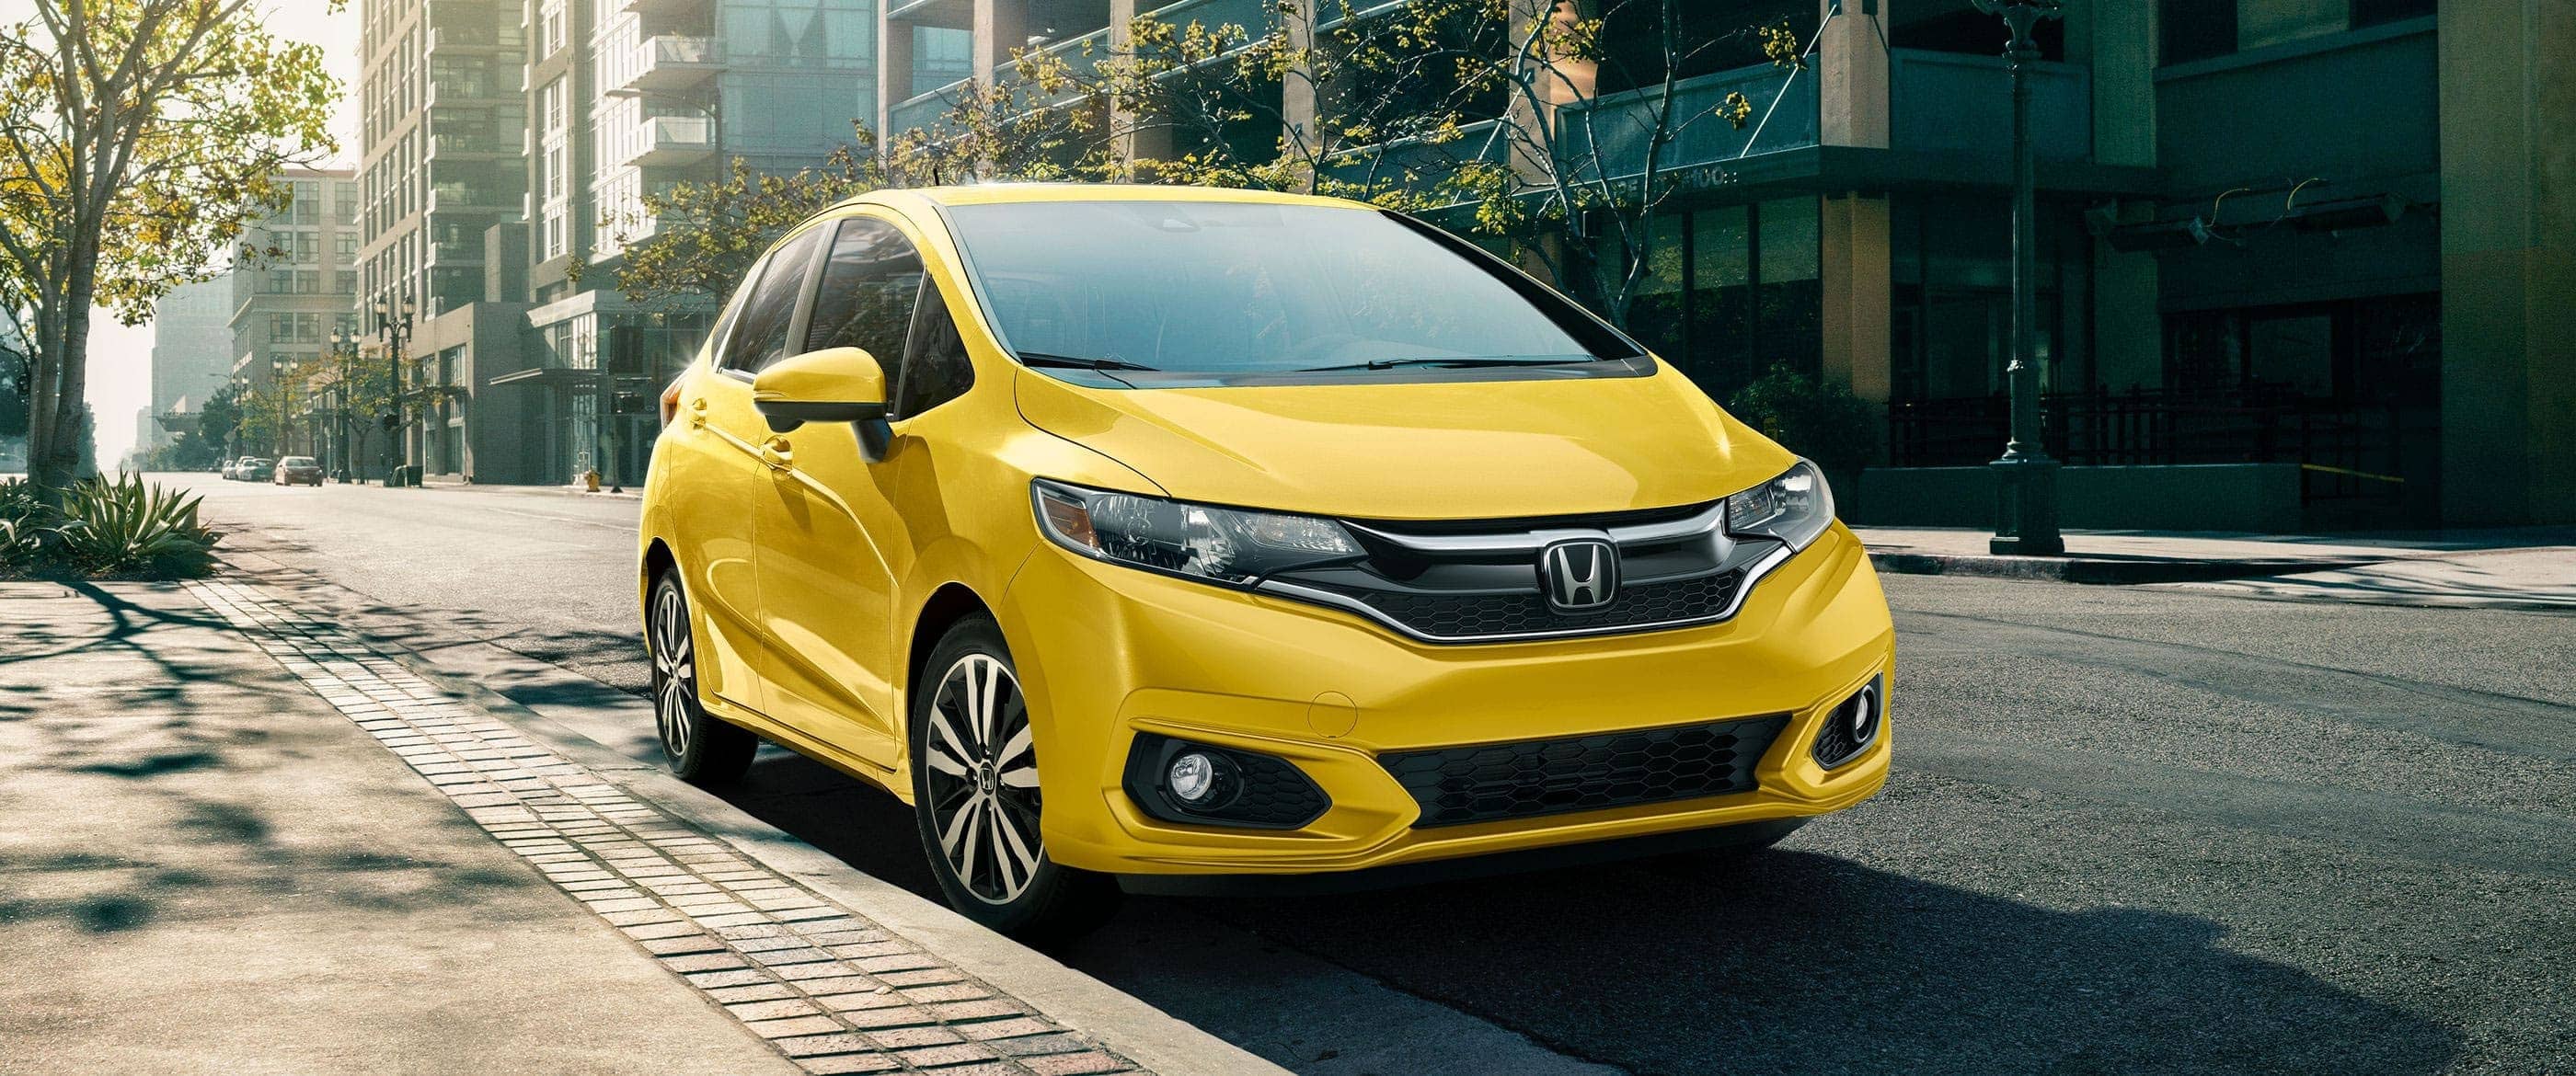 2018 Honda Fit Yellow Color Front View In City On Street - 2019 Honda Civic Si Tonic Yellow Pearl , HD Wallpaper & Backgrounds